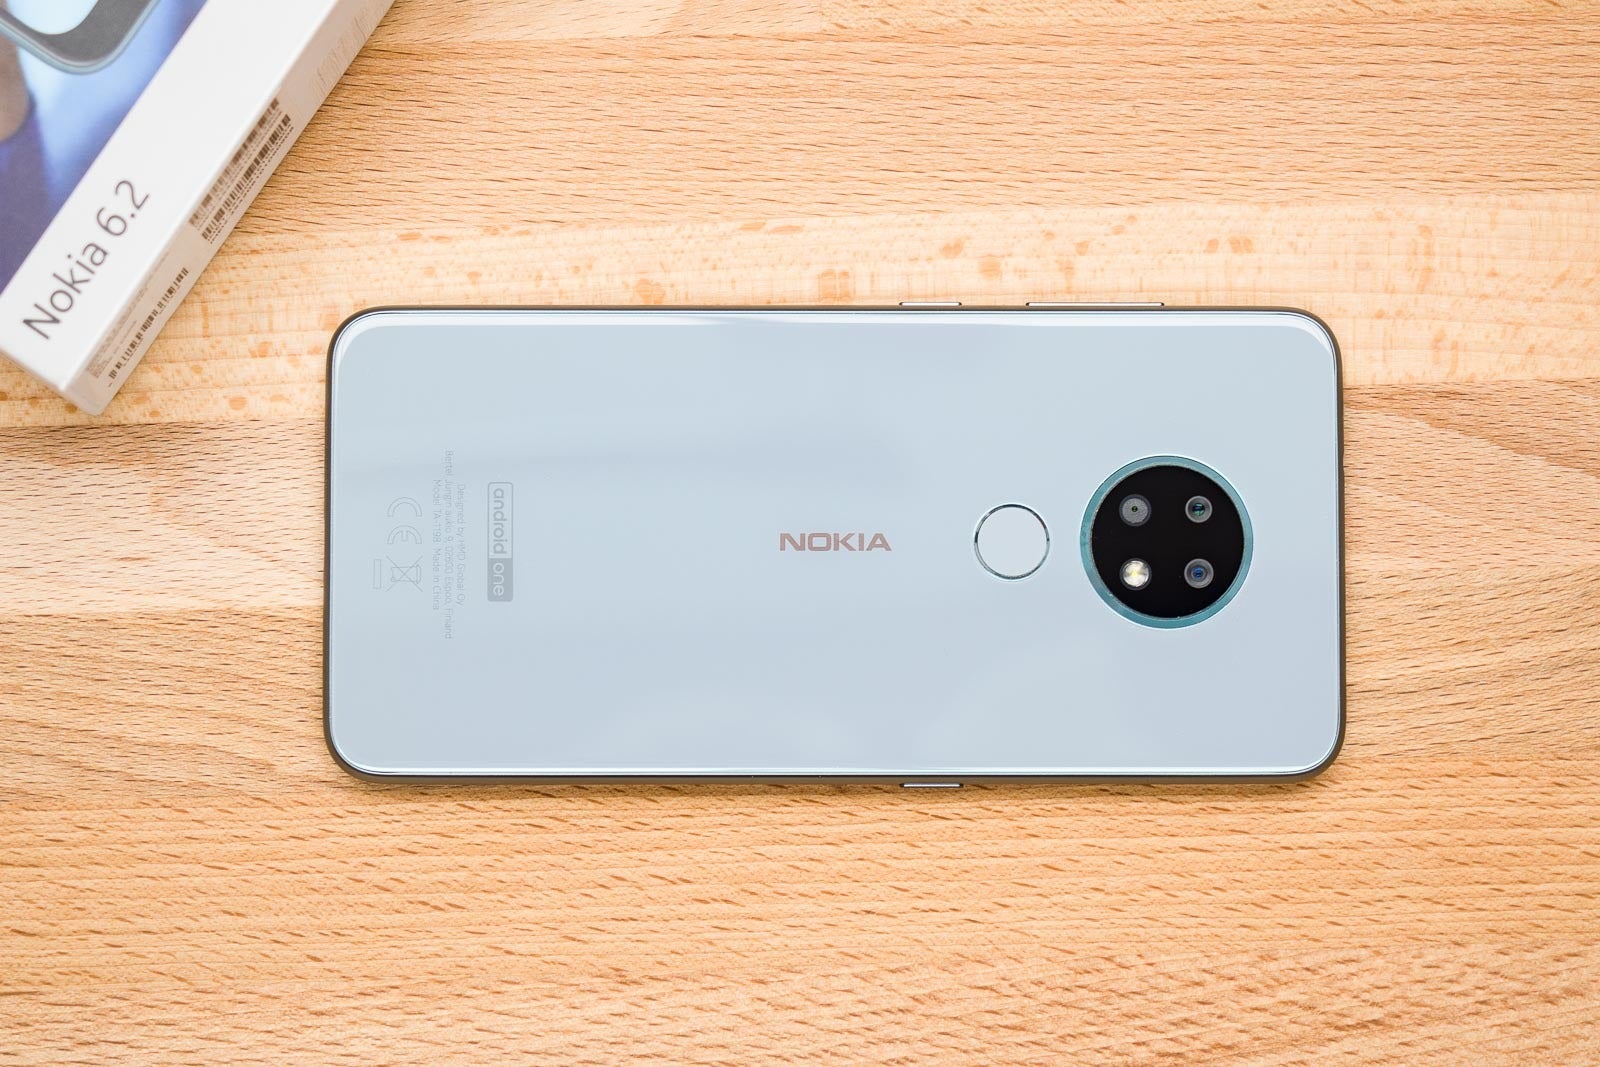 Nokia 5.2 and Nokia 1.3 to be joined by several products at MWC 2020